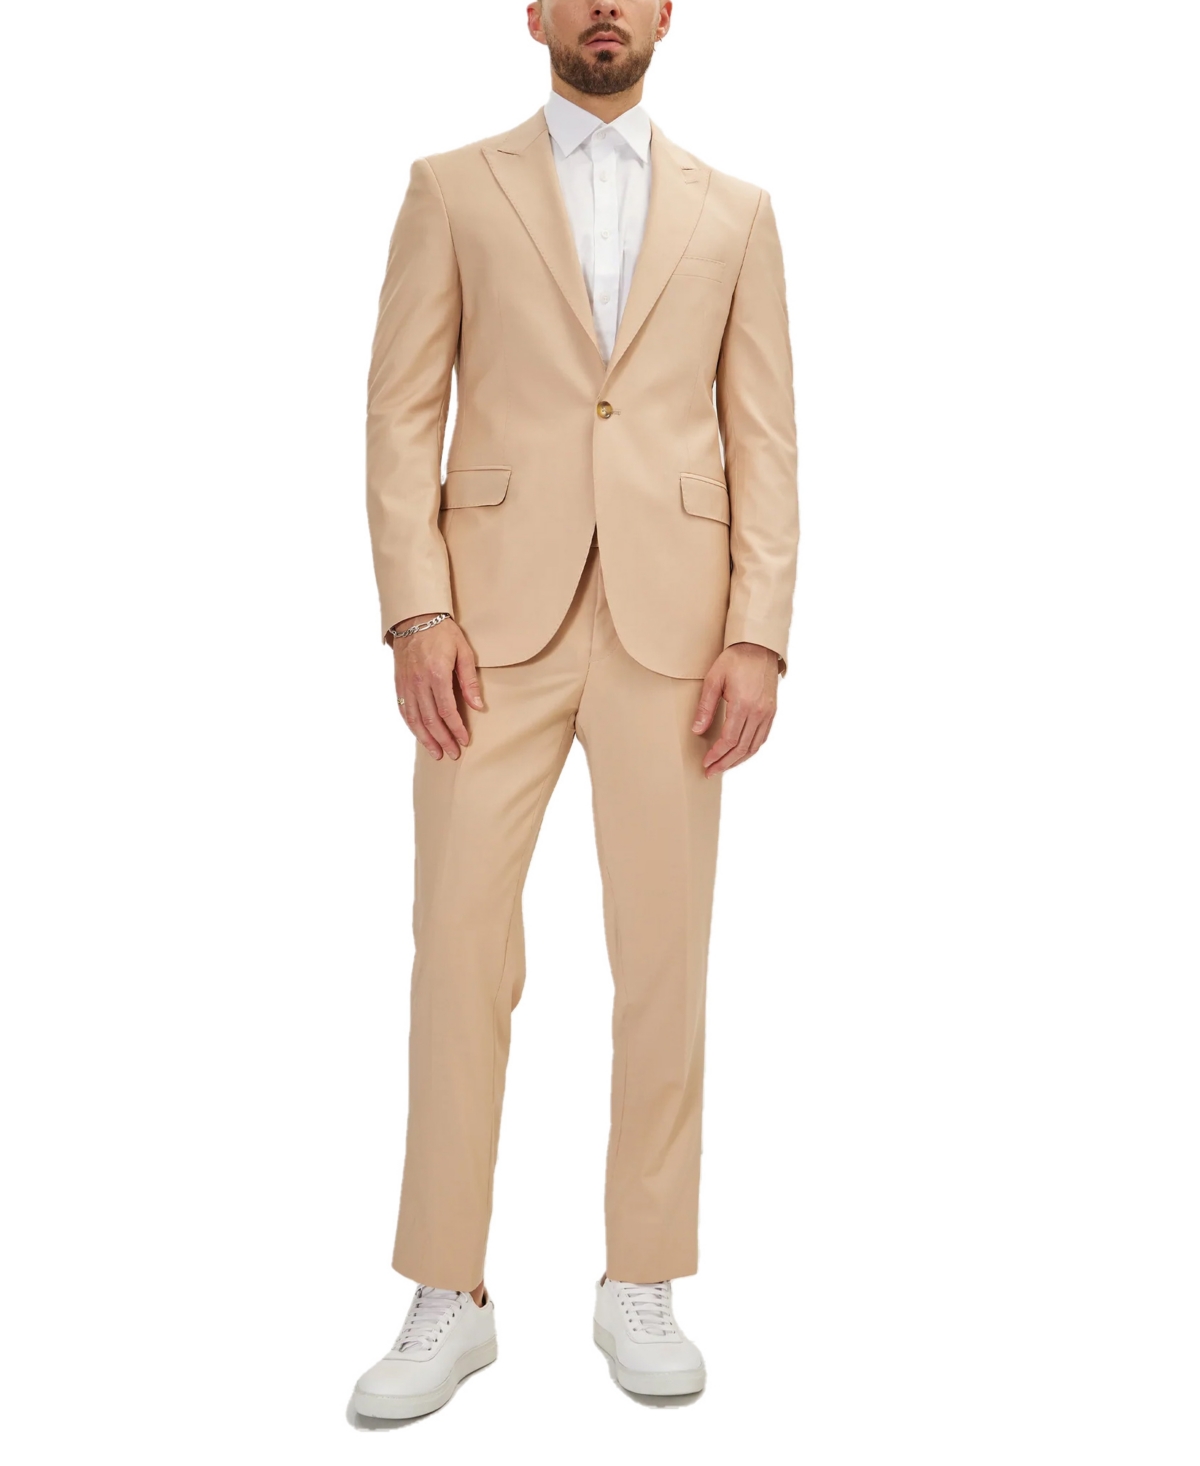 Ron Tomson Men's Modern Single Breasted, 2-piece Suit Set In Tan